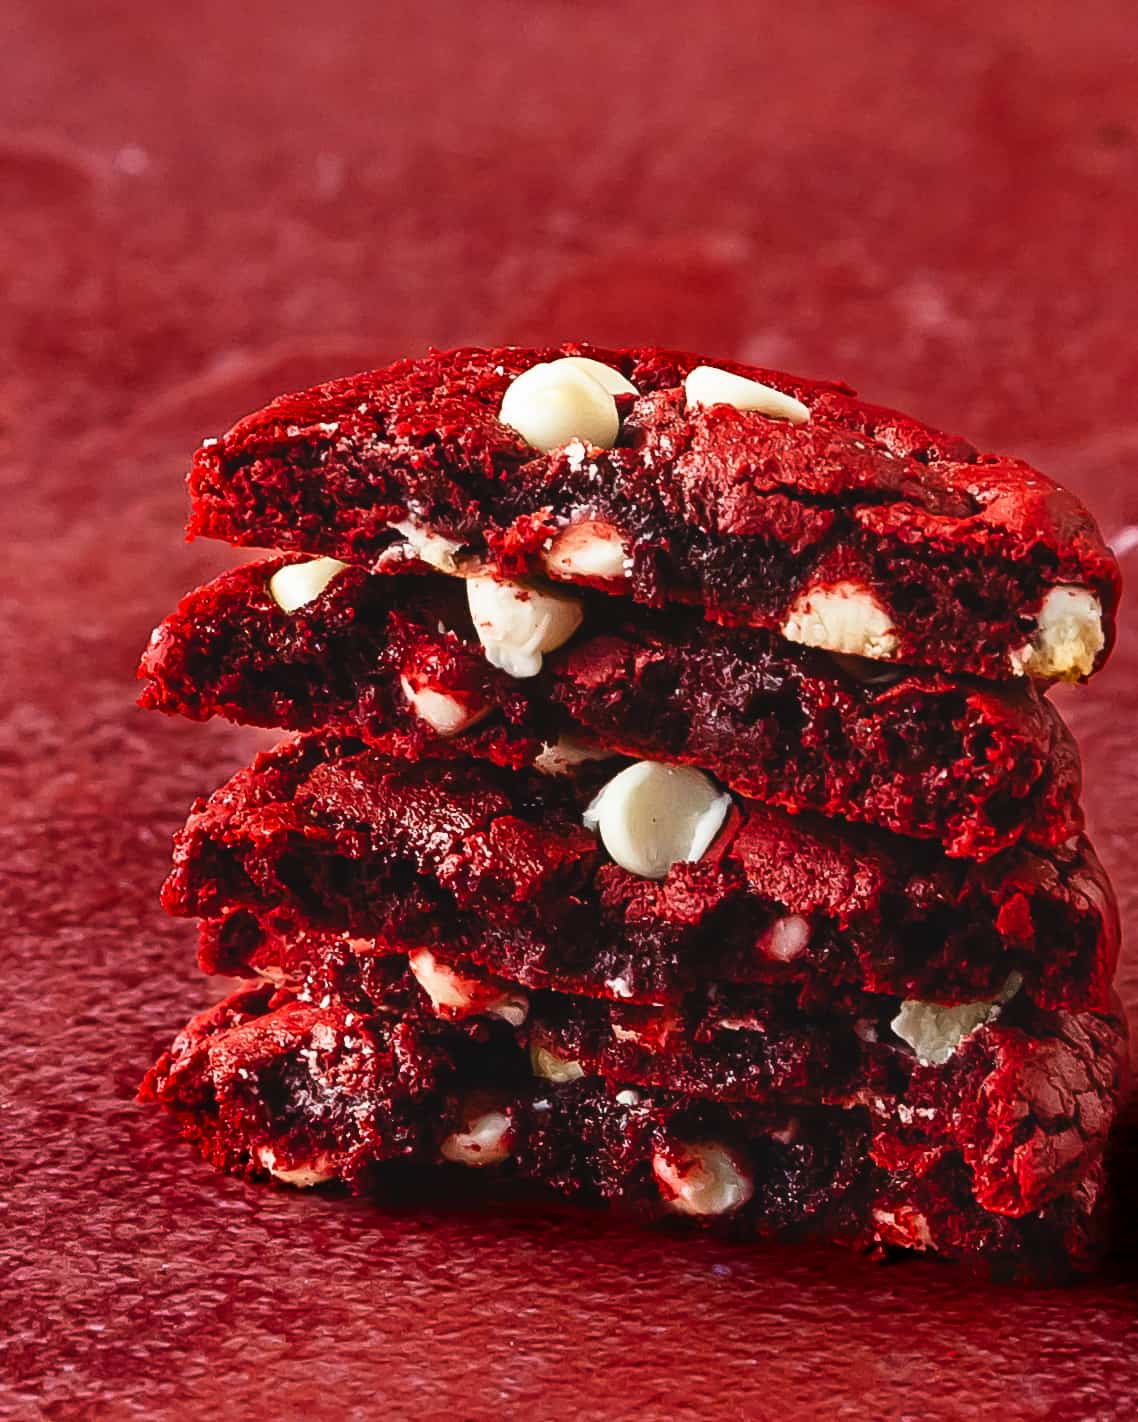 Red velvet cake mix cookies are soft and chewy red velvet cookies with creamy white chocolate chips. What makes this red velvet cookies from cake mix the best recipe is that you only need a few simple ingredients to make them. They’re the perfect easy to make, holiday cookie you can enjoy all year long.